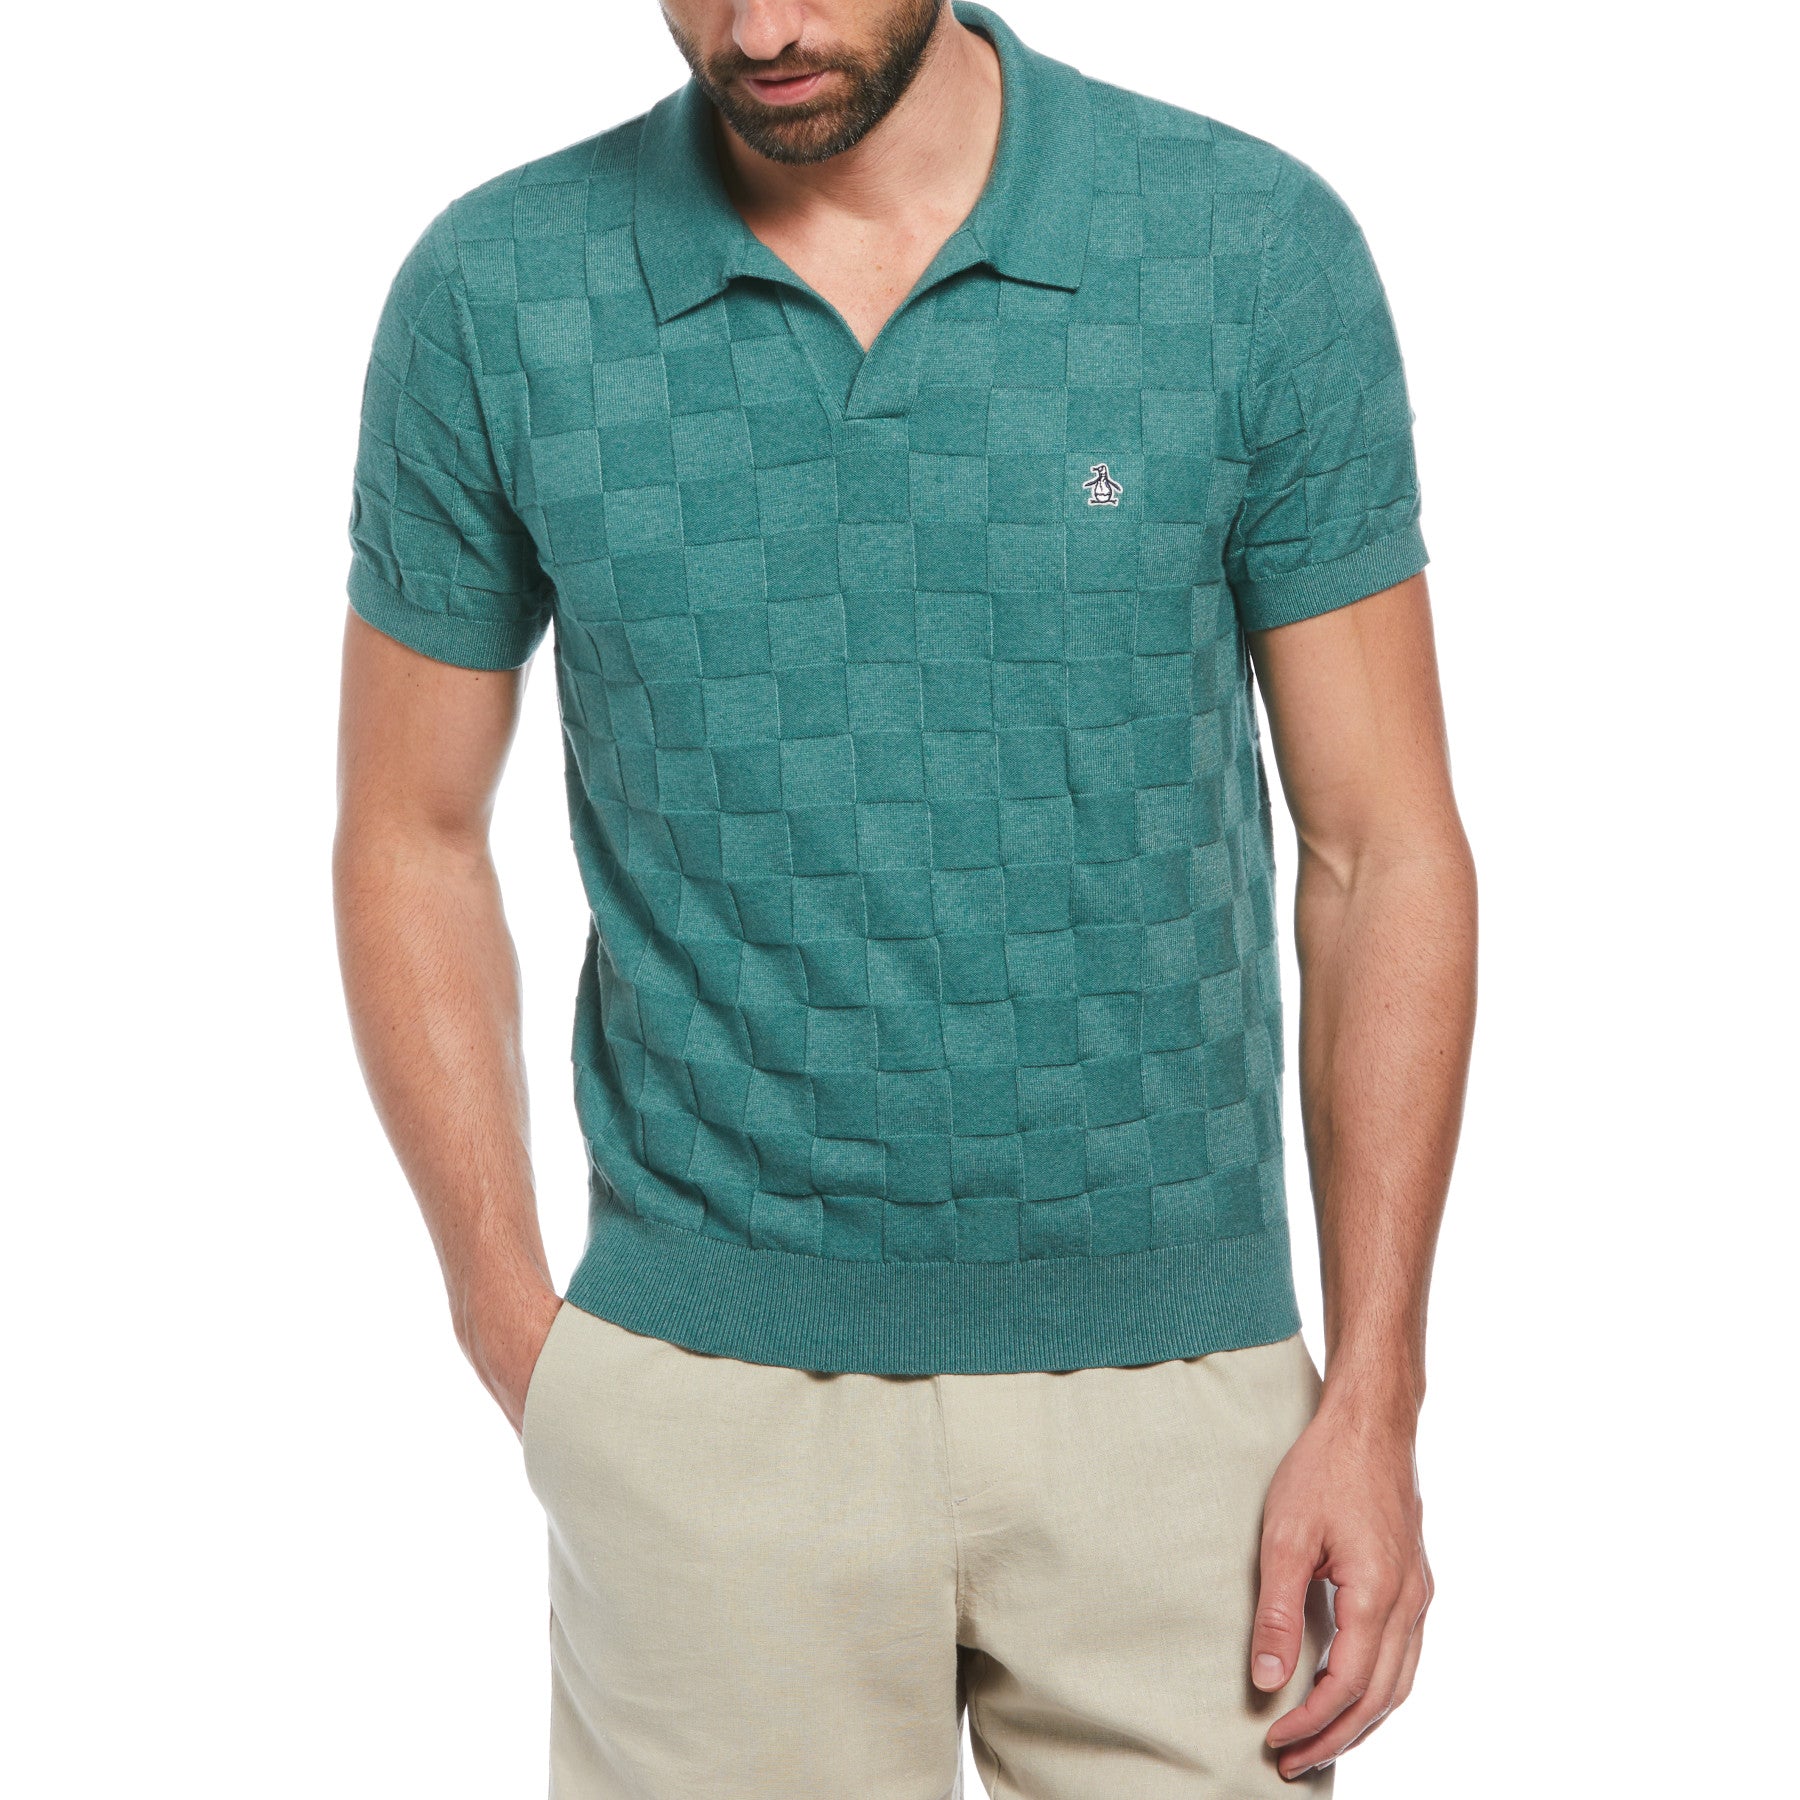 View Jacquard Johnny Collar Short Sleeve Polo Shirt Sweater In Sea Pine information